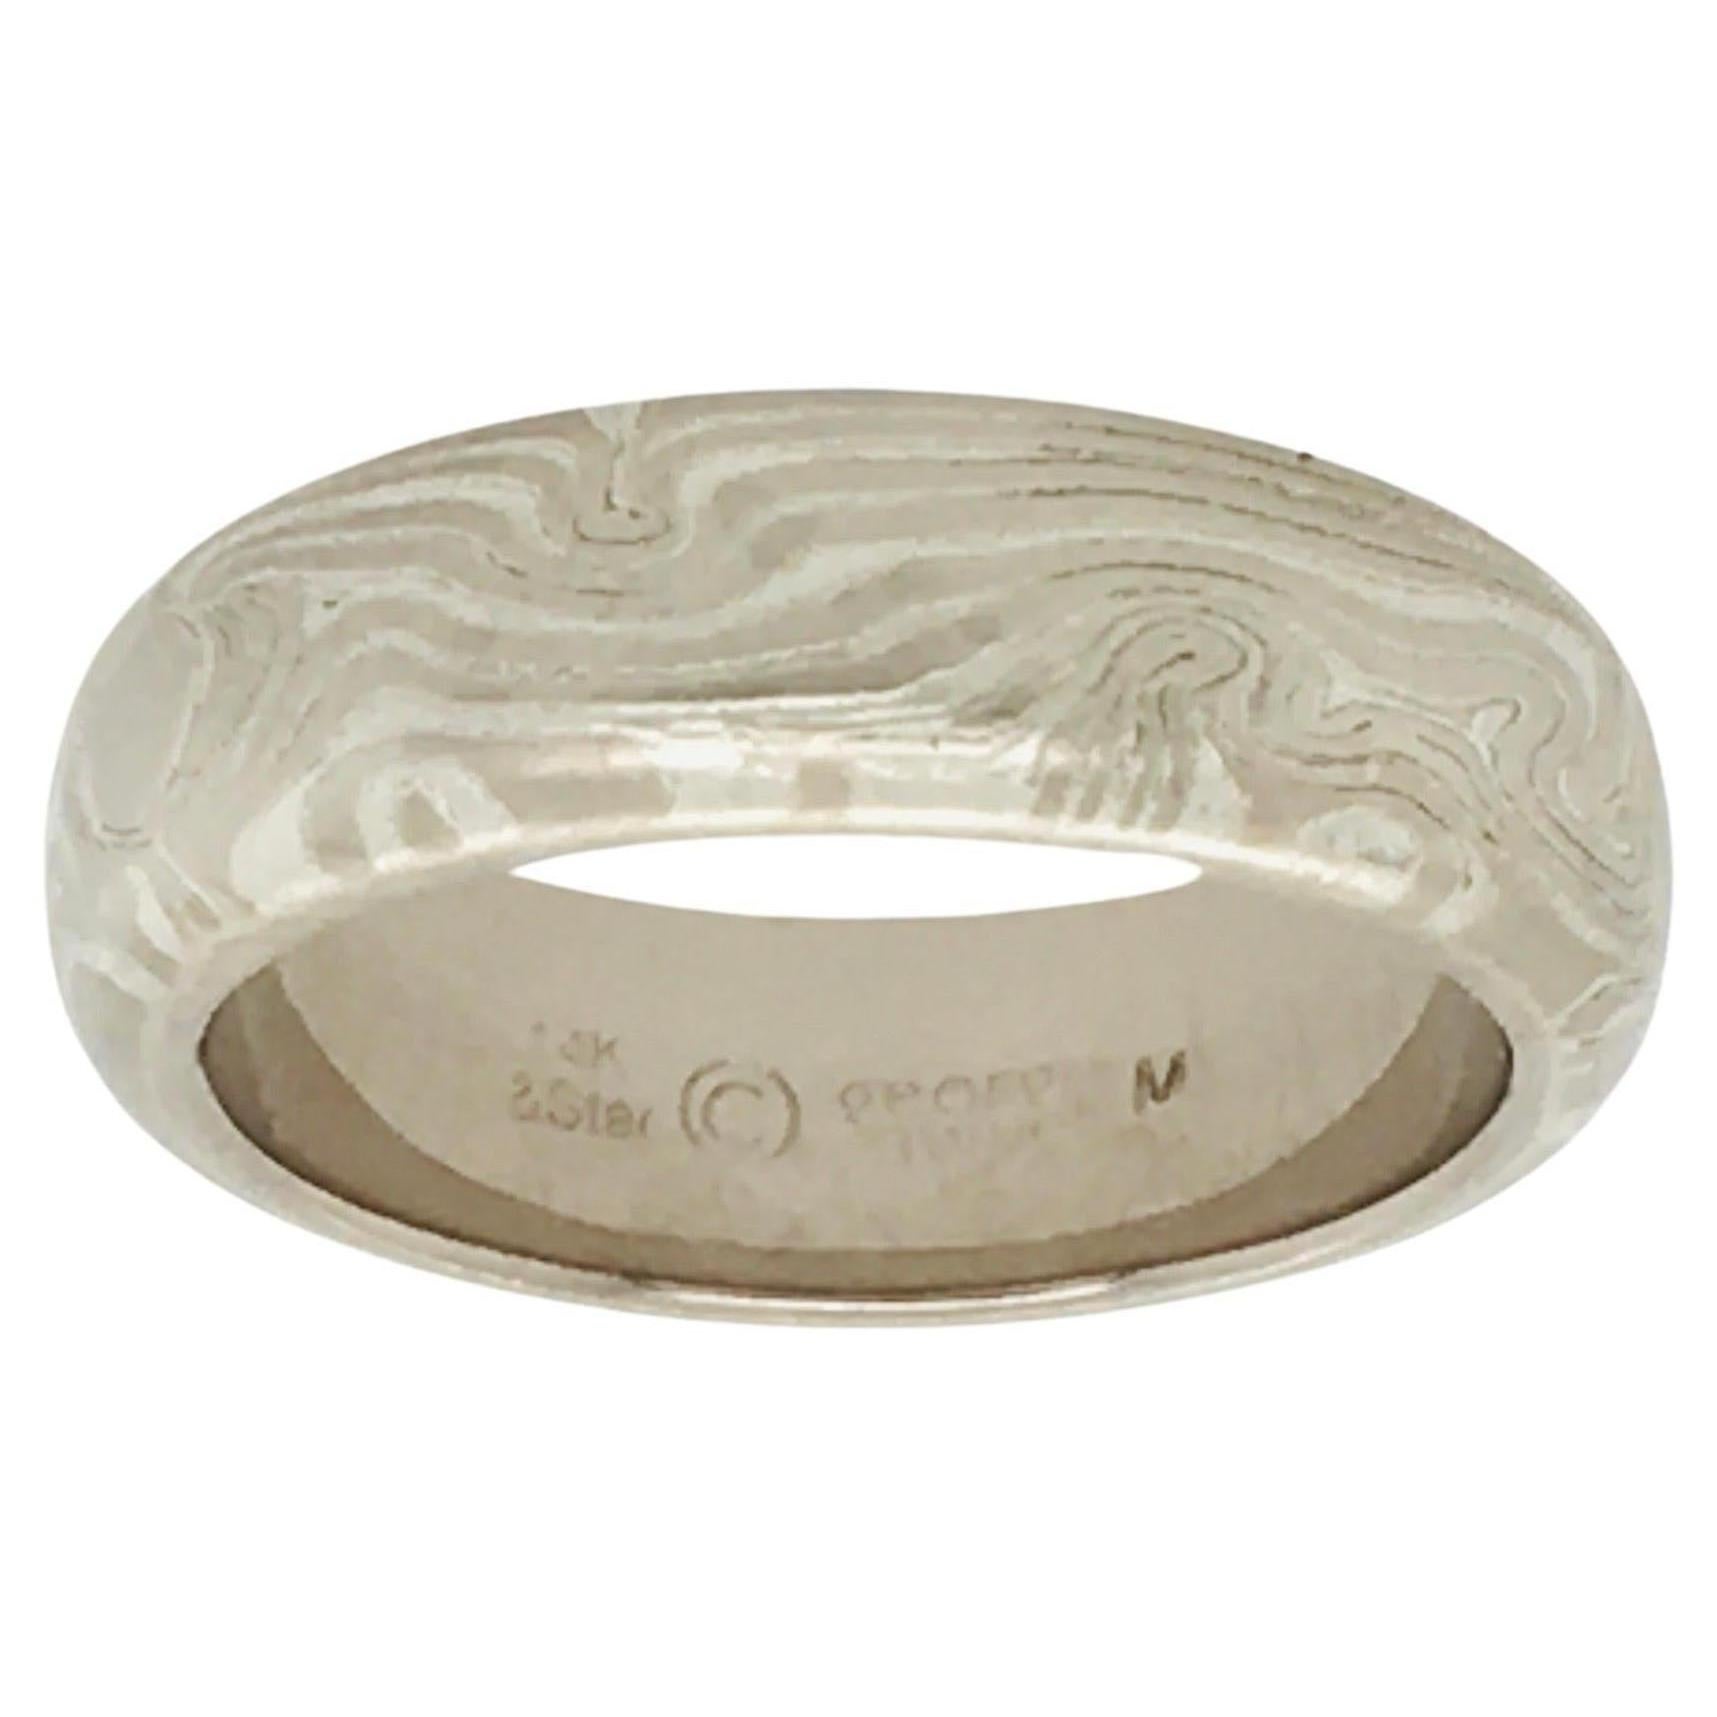 A striking half round wedding band by George Sawyer in the traditional Mokume style.   This 6 mm ring features 14K Gray Gold & Etched Sterling.  Interior stamp shows 